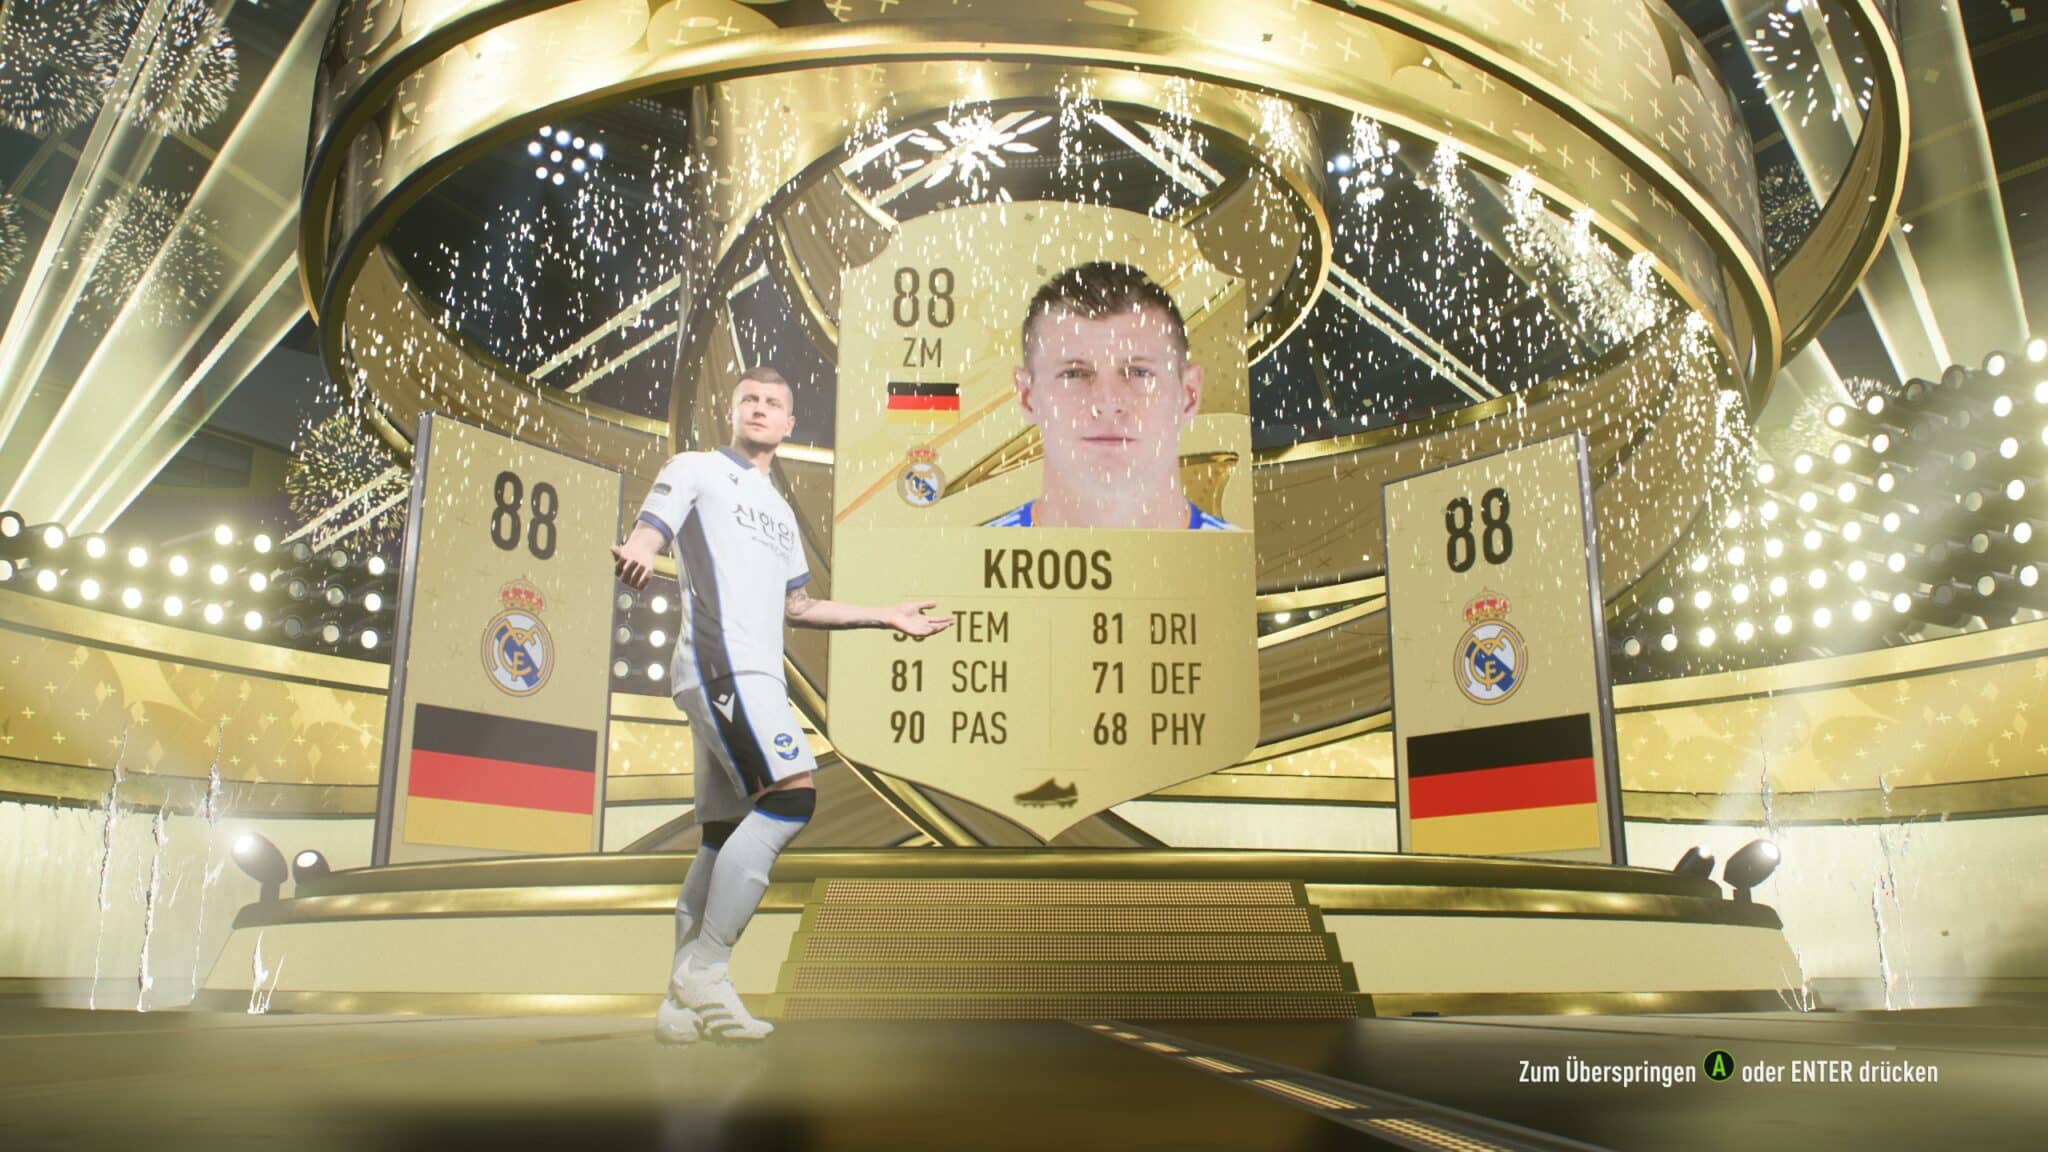 (If you draft a strong player in FUT, you get fireworks and lots of crash, boom, bang.)